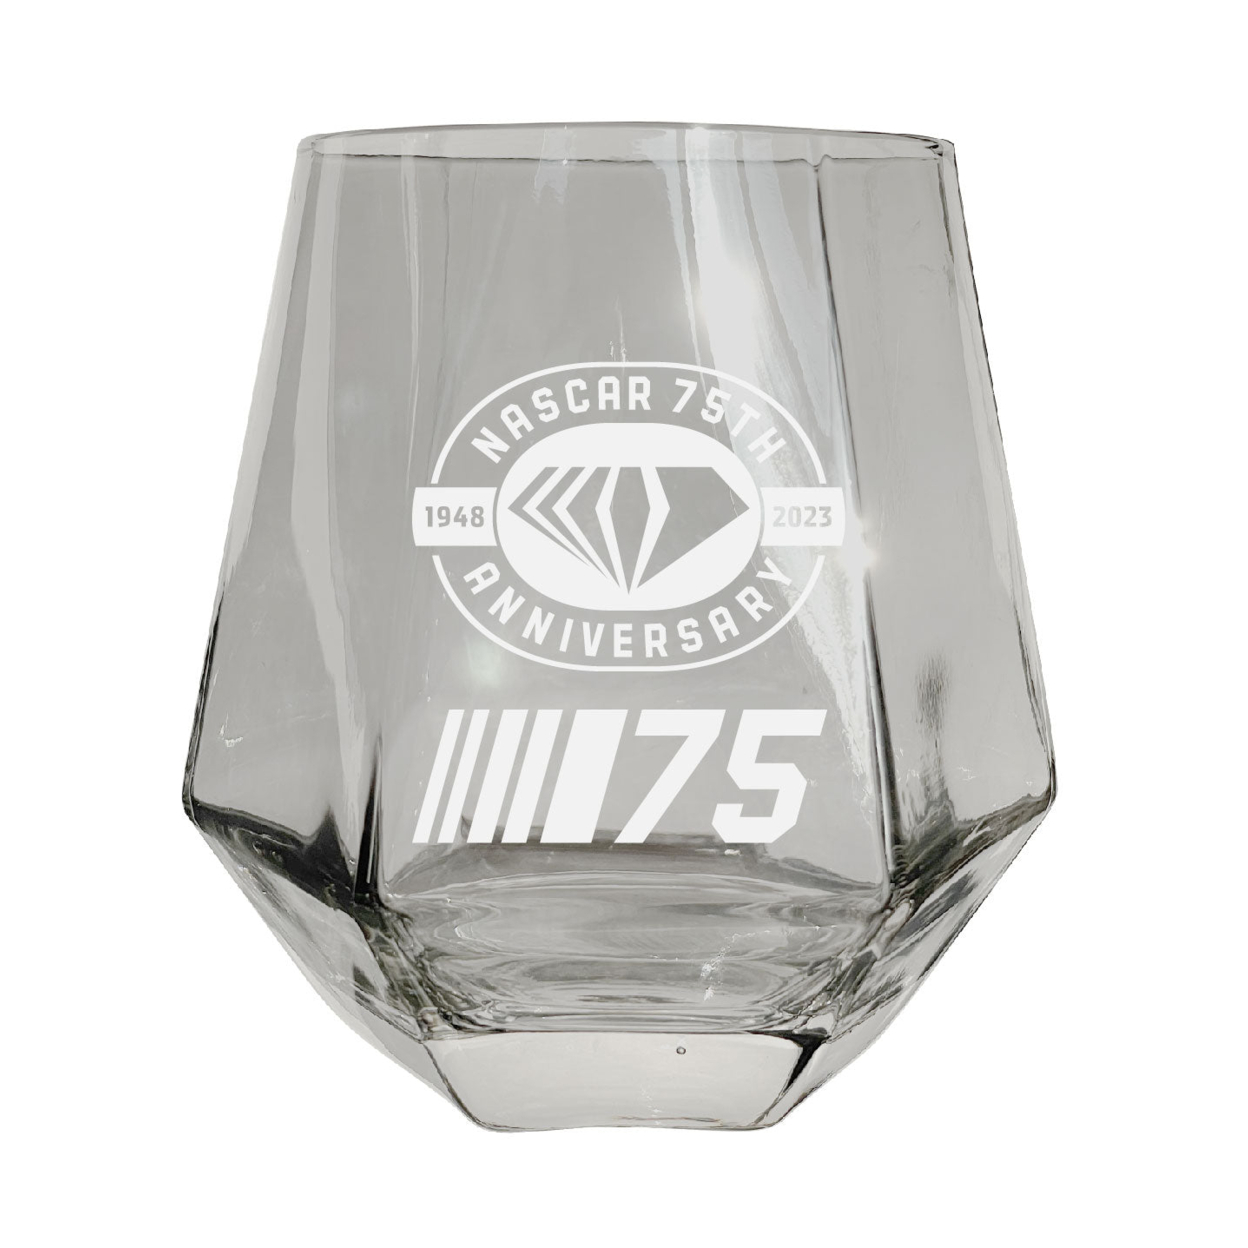 NASCAR 75 Year Anniversary Officially Licensed 10 Oz Engraved Diamond Glass - Clear, Single